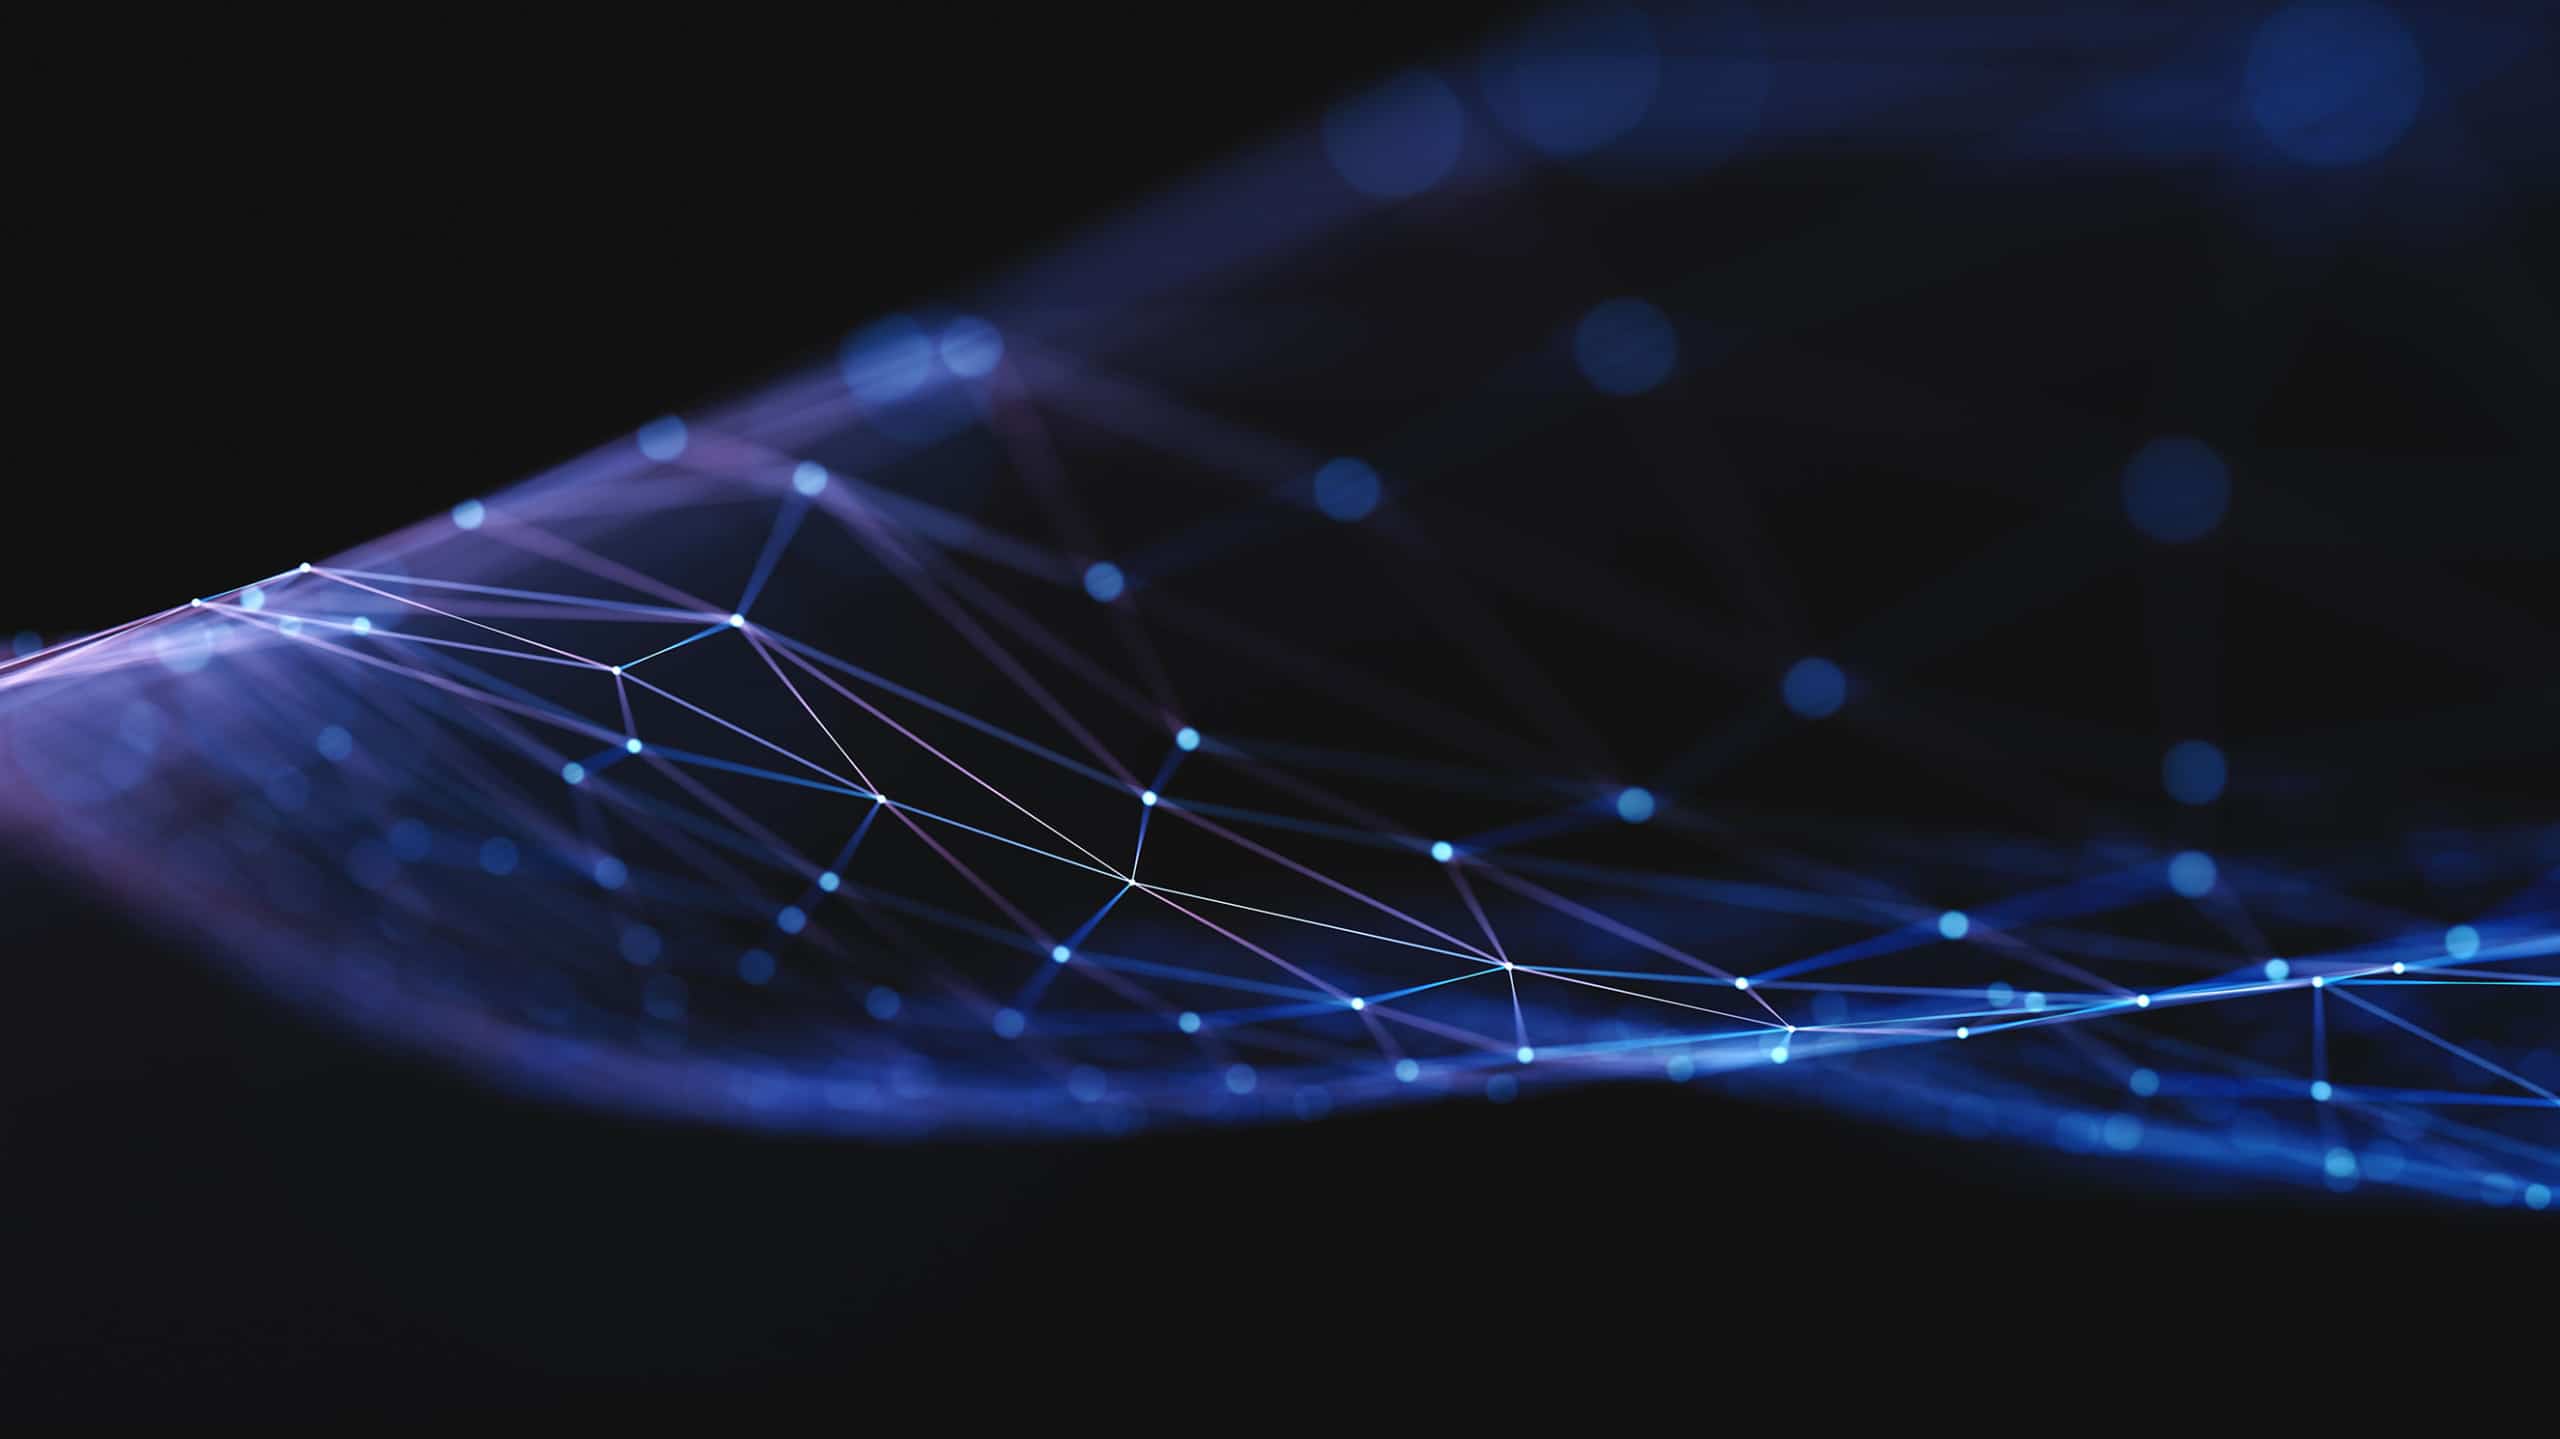 Abstract image of a network with glowing blue nodes connected by lines, creating a wave-like digital pattern on a dark background, suggesting advanced technology or data connectivity.